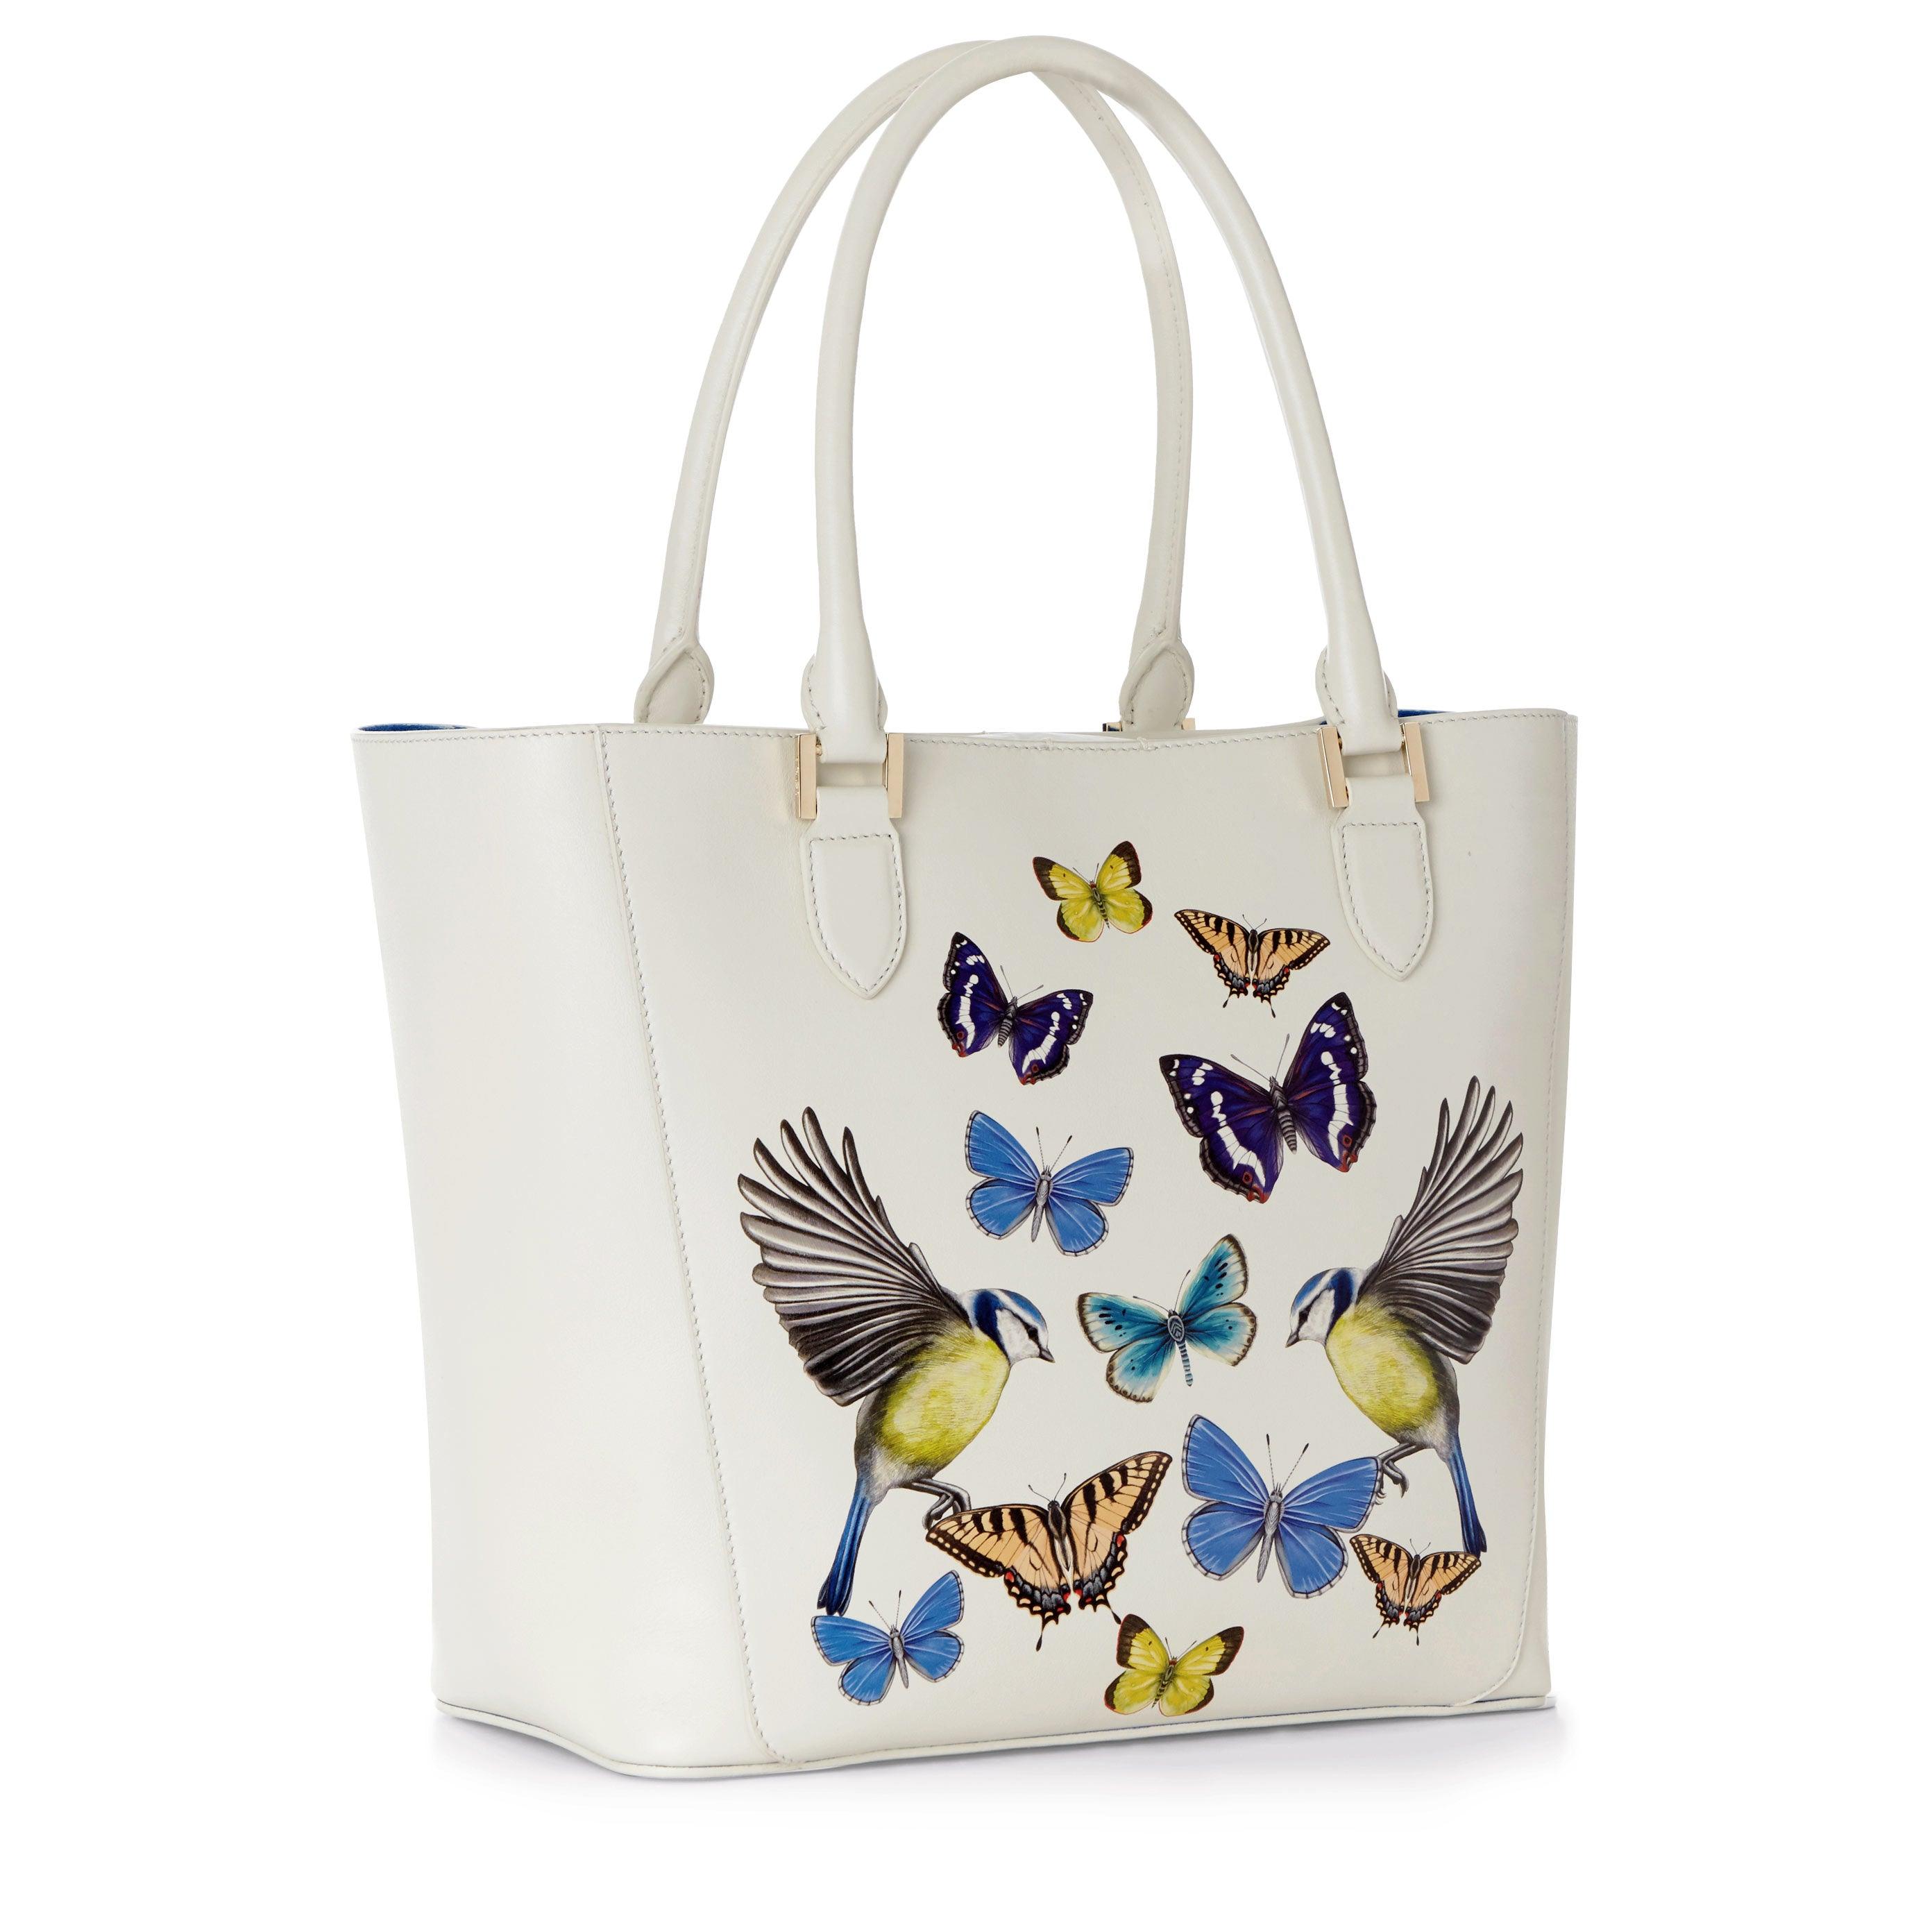 Off White Princess Shopper Bag with Butterflies Print - SEVDA LONDON Designer Bags from Italy.